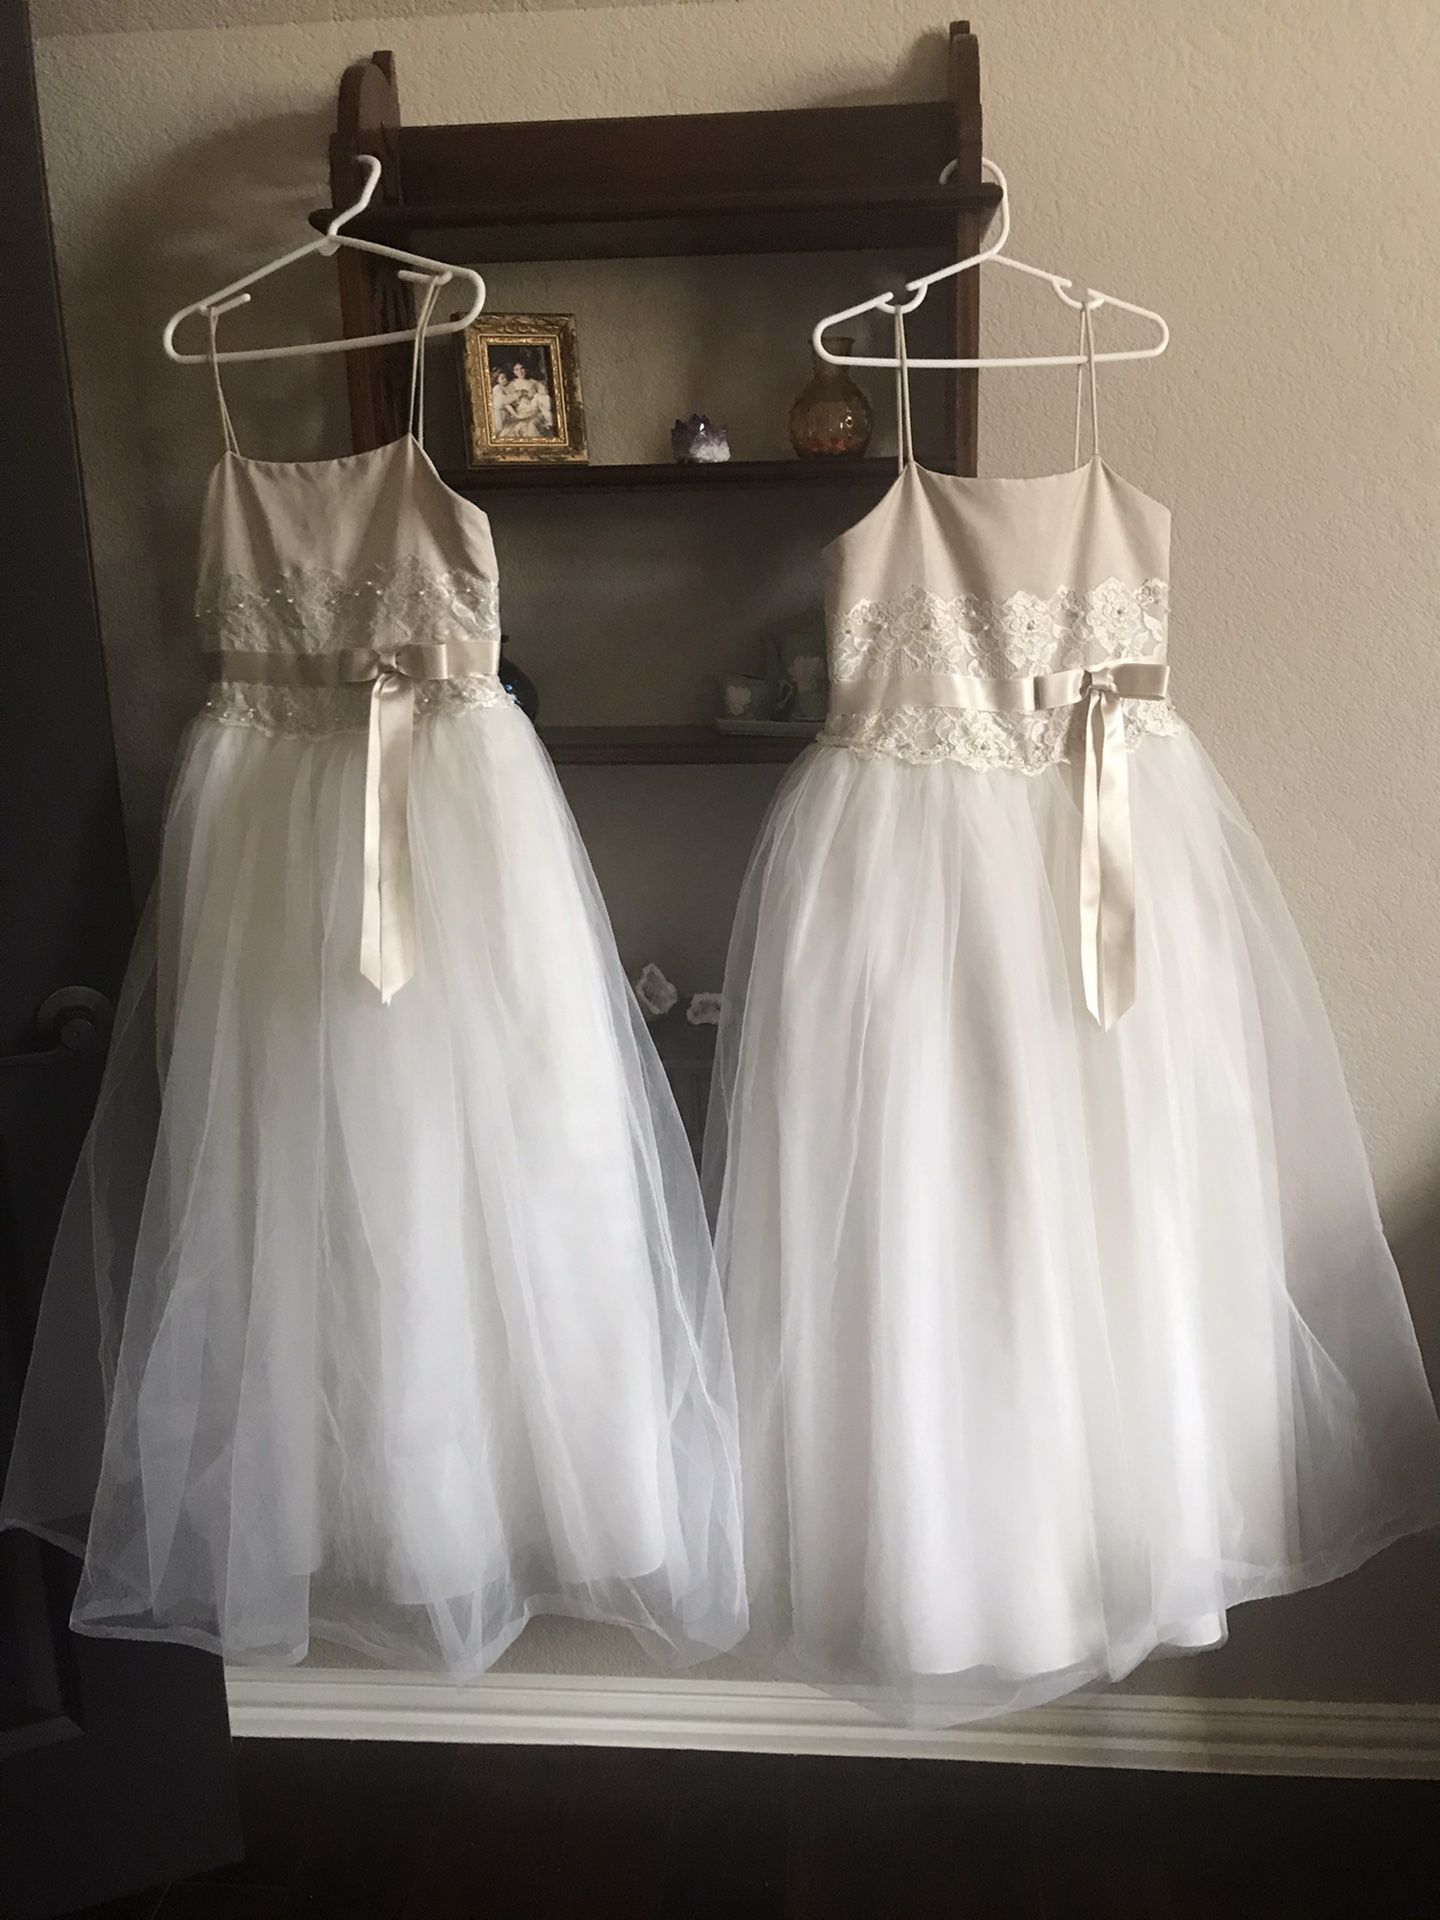 Size 7 and size 8 flower girl dresses